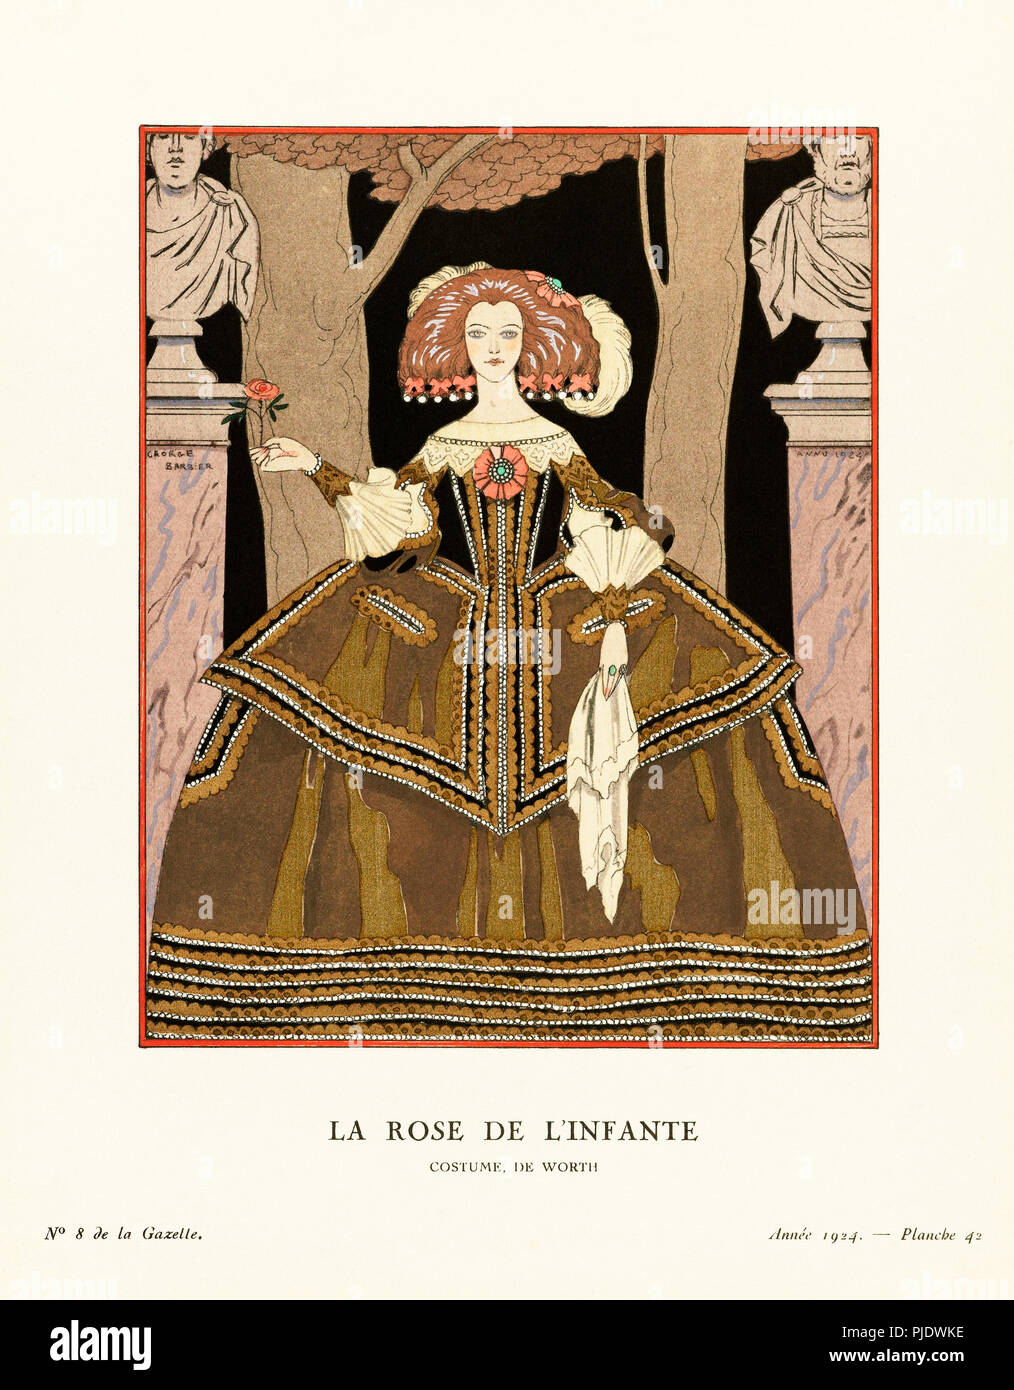 La Rose de l'infante.  The Infanta’s Rose.  (An infanta is a daughter of the ruling monarch of Spain or Portugal).  Costume, de Worth.  Costume by Worth. Art-deco fashion illustration by French artist Georges Barbier, 1882-1932.  The work was created for the Gazette du Bon Ton, a Parisian fashion magazine published between 1912-1915 and 1919-1925. Stock Photo